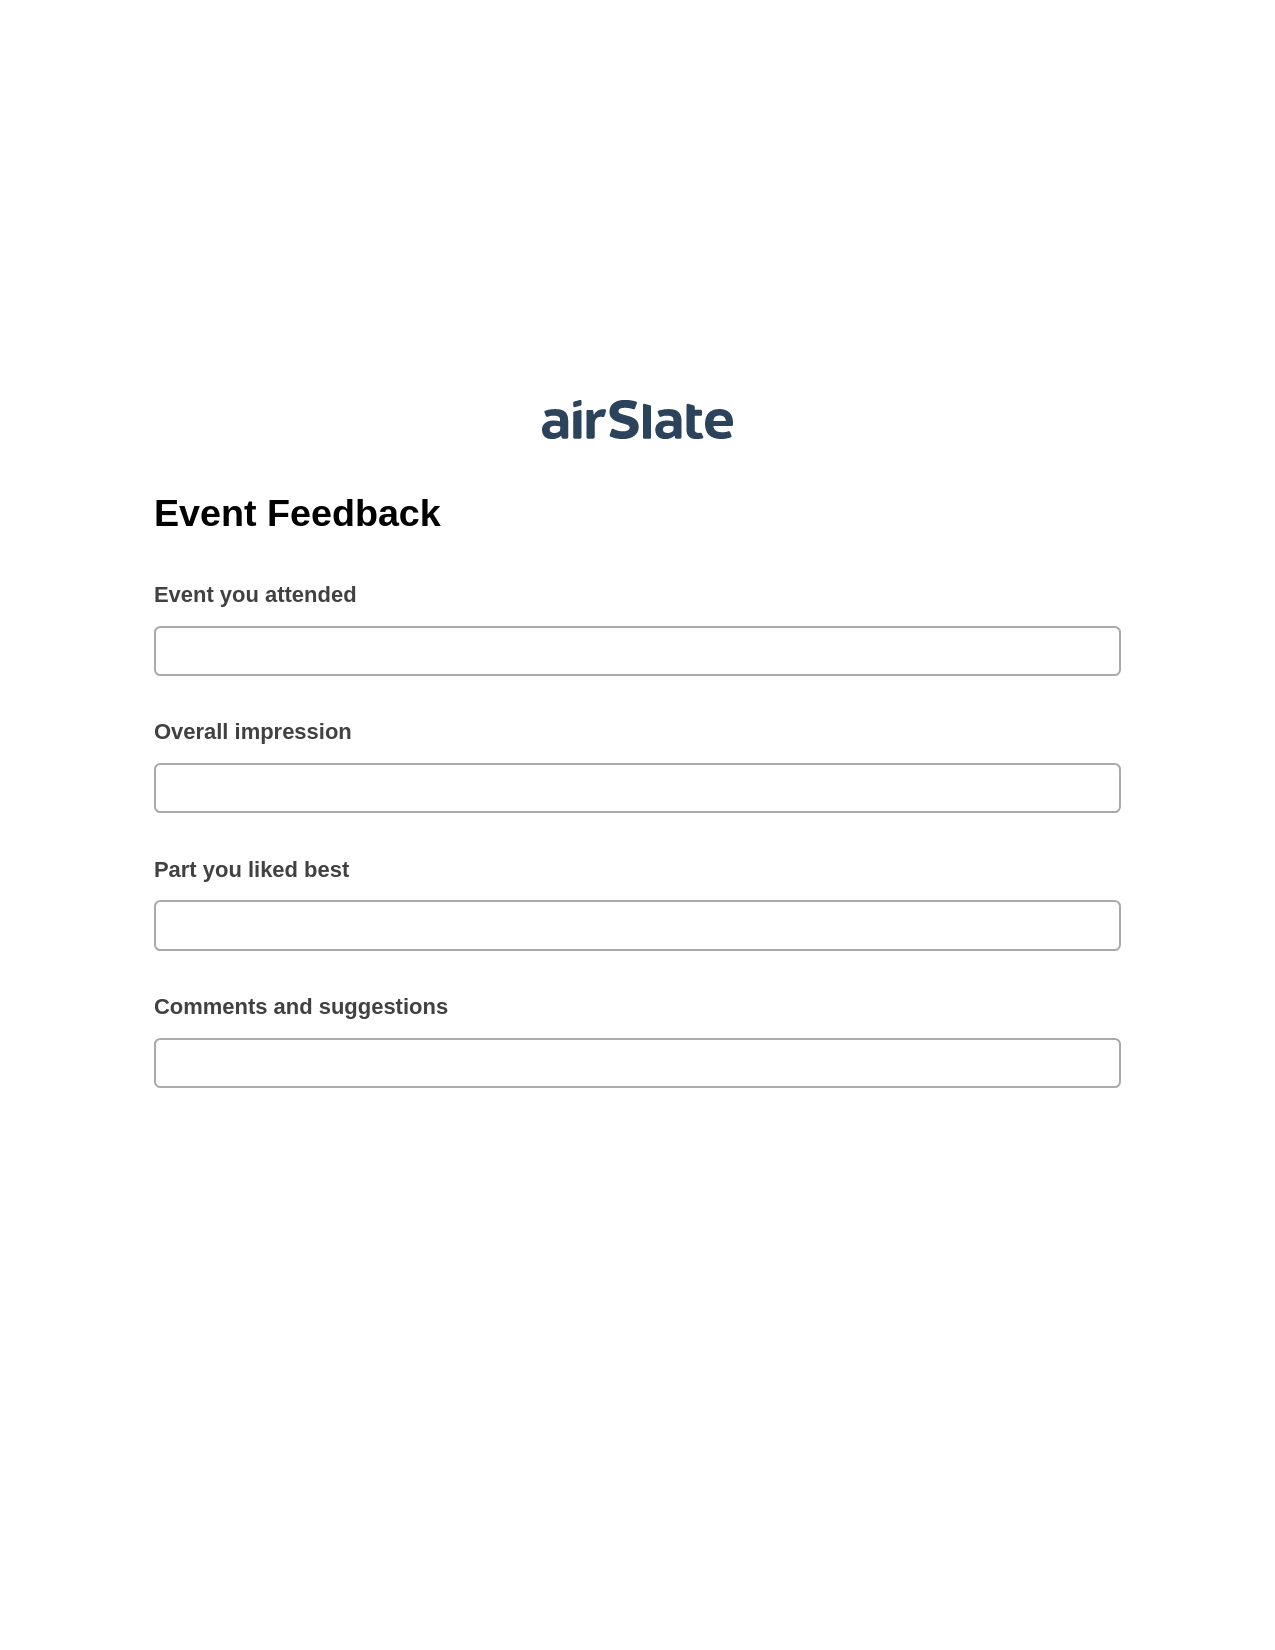 Event Feedback Pre-fill from another Slate Bot, SendGrid send Campaign bot, Box Bot